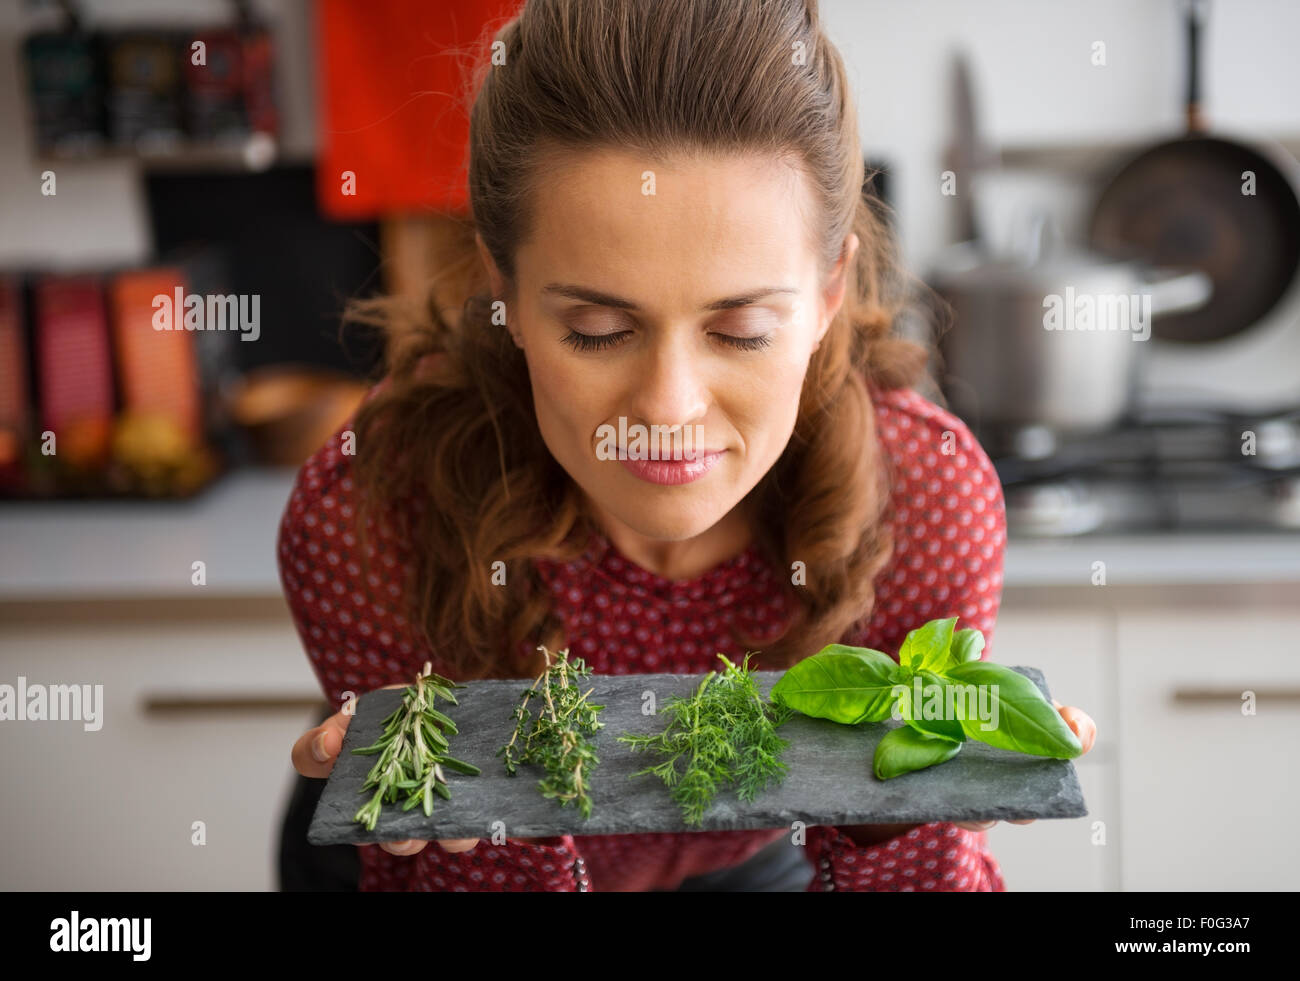 Oh, the heady smell of fresh herbs, conjuring up dreams of all kinds of recipes... A woman, smelling deeply, and closing her eyes in pleasure, leans over a slate showing a few sprigs of fresh herbs. Stock Photo